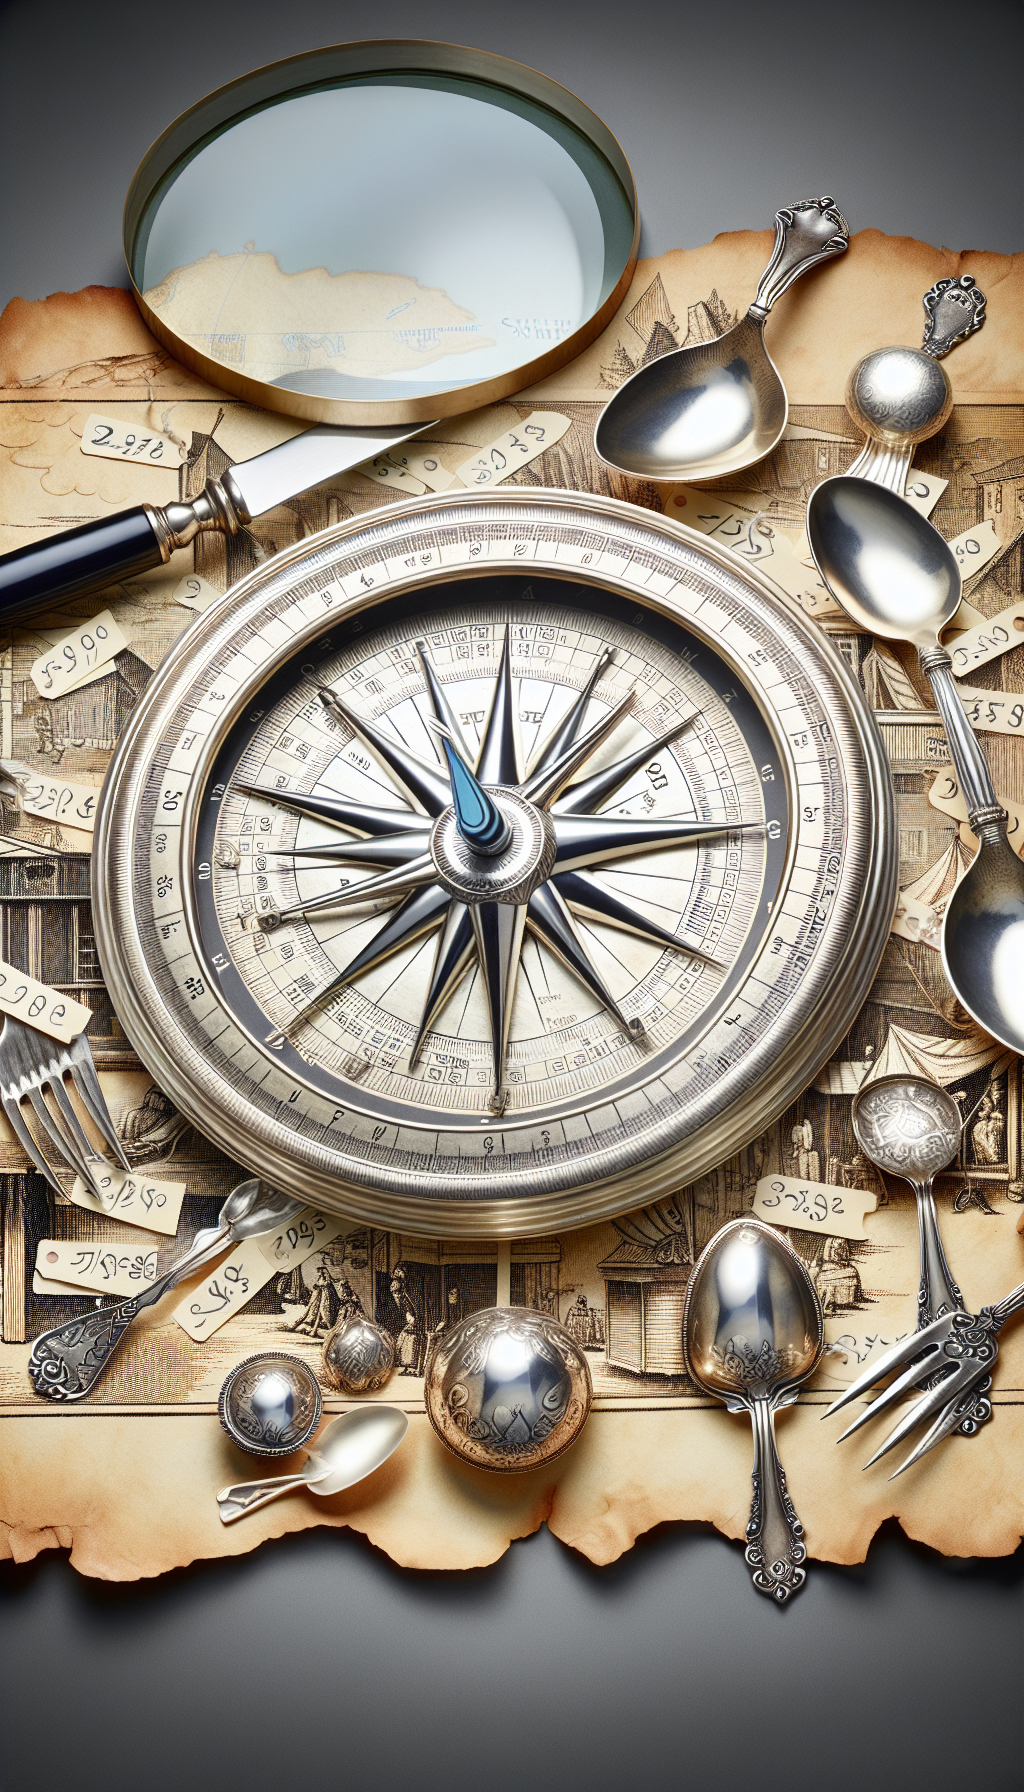 An elegant compass rose, intertwined with glimmering antique silver forks and spoons for its points, sits atop a parchment map cluttered with market stall illustrations. Various silver pieces marked with fluctuating price tags symbolize the shifting supply and demand, while a magnifying glass highlights the intricate hallmarks that determine the antique silverware's value.